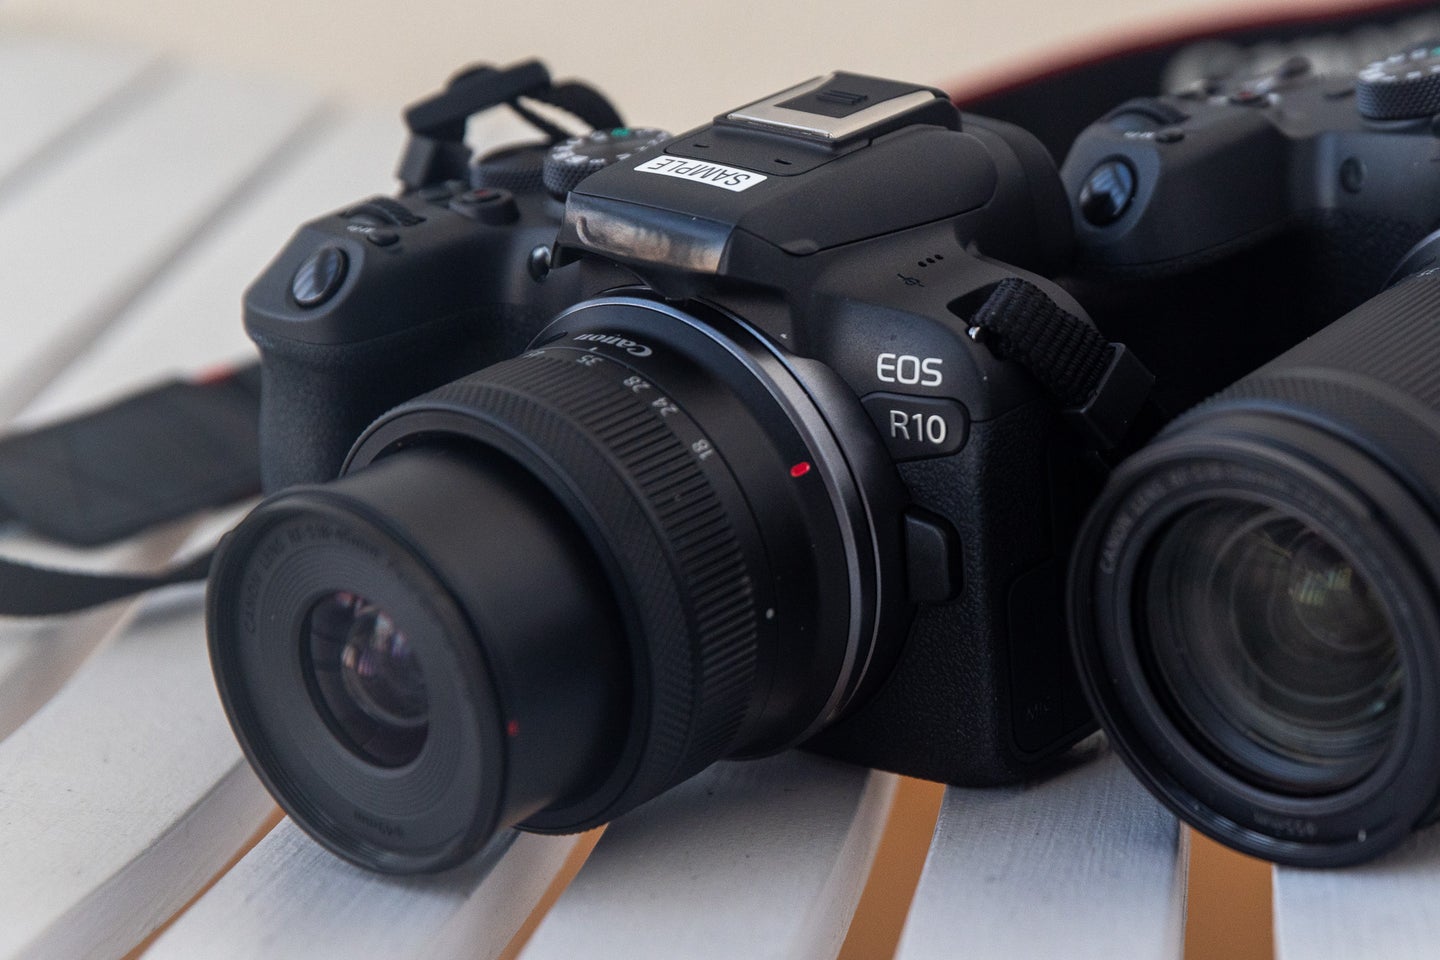 Canon EOS R10 review: A unique mix of features in an APS-C camera body